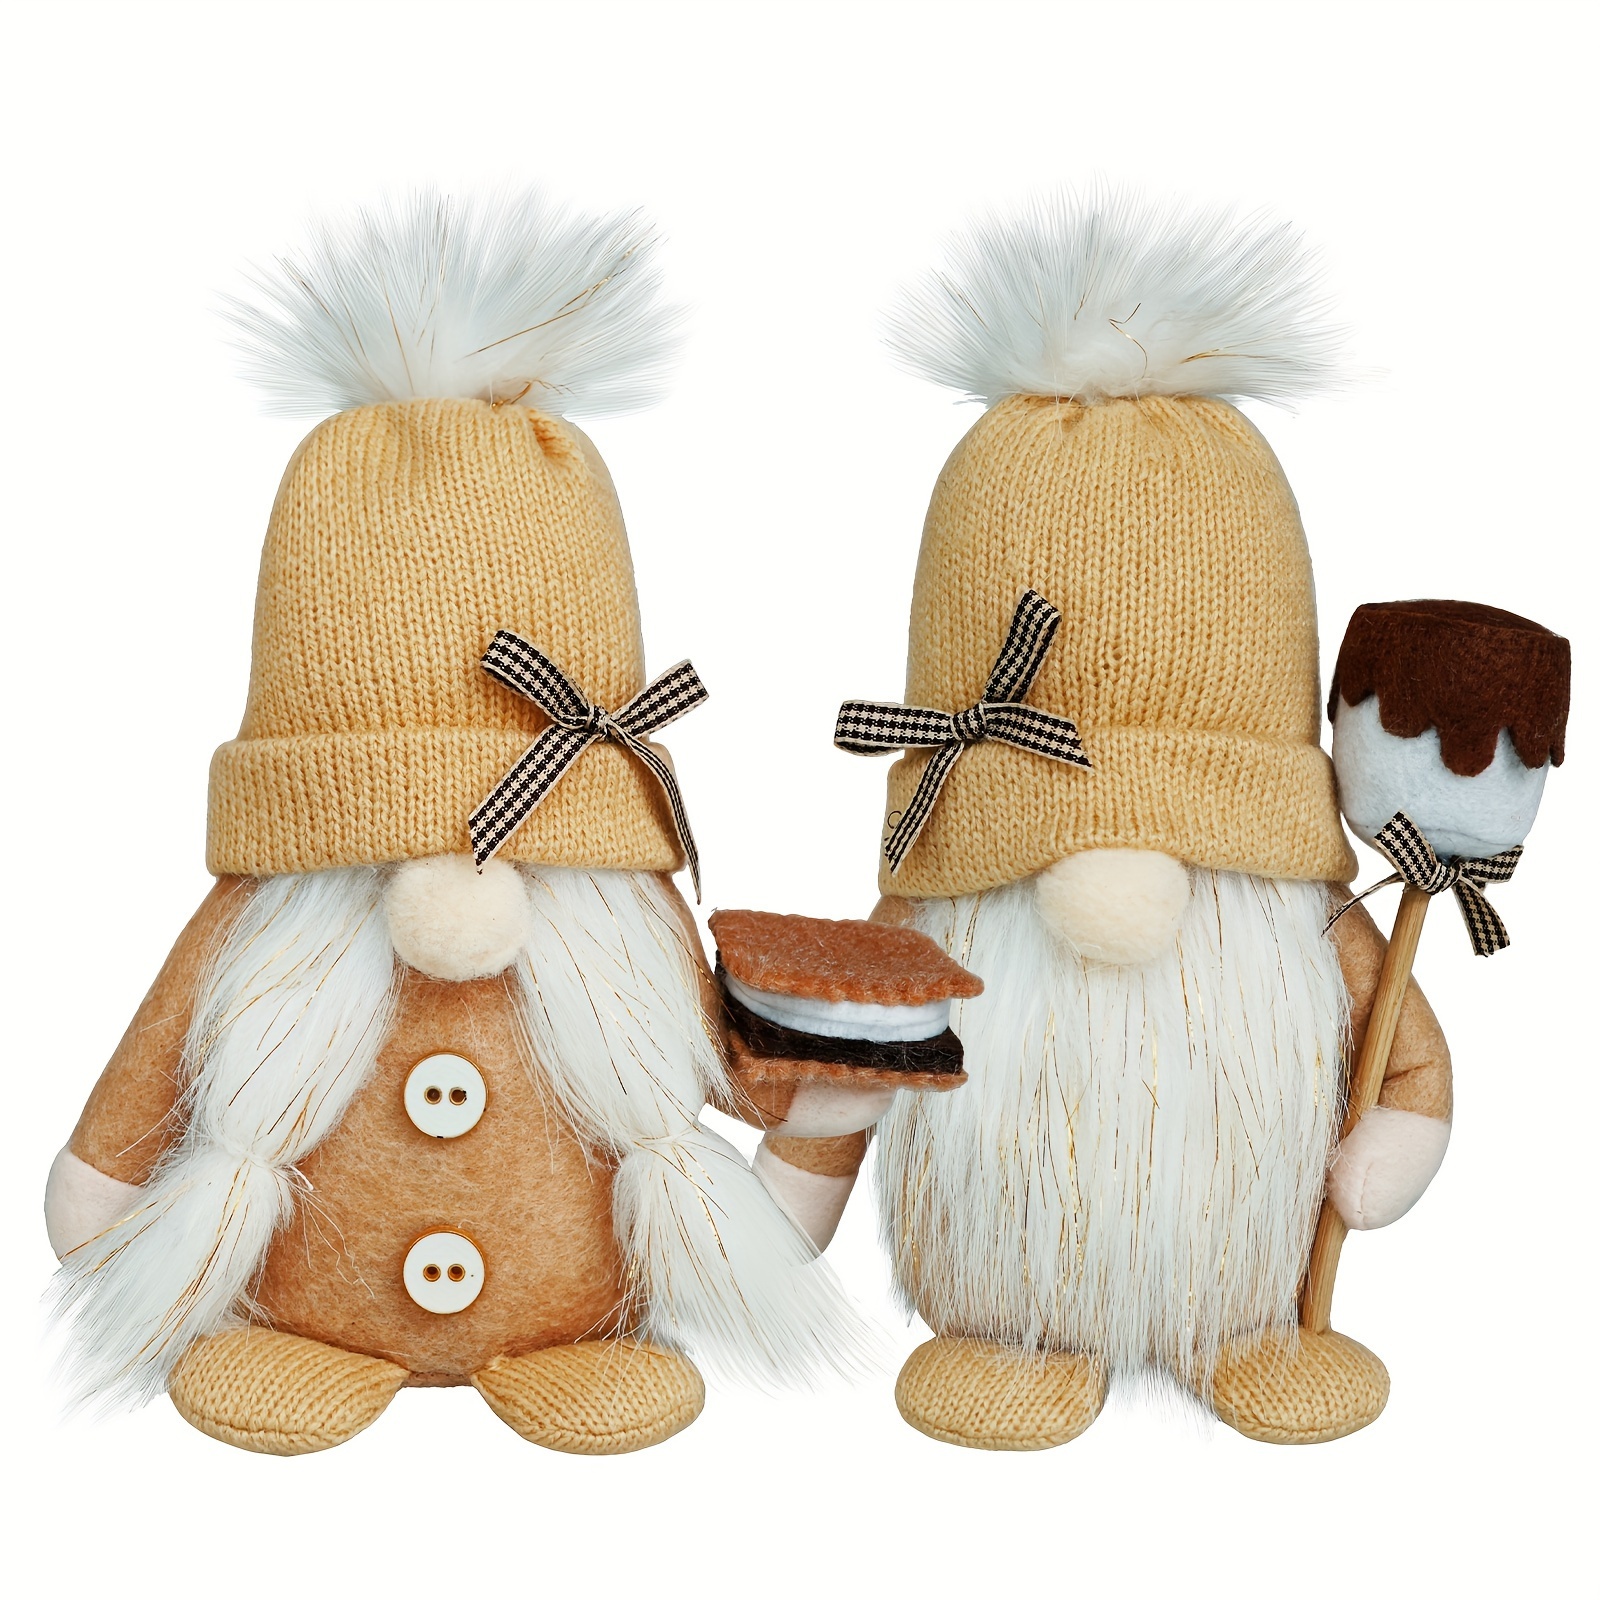 

2pcs S'more Gnome Decorations For Home, Camping Gnome Knitted Soft Tomte For Tiered Tray Decor Scandinavian Elf Gnome With Marshmallow And Chocolate Cream Pie Gnomes